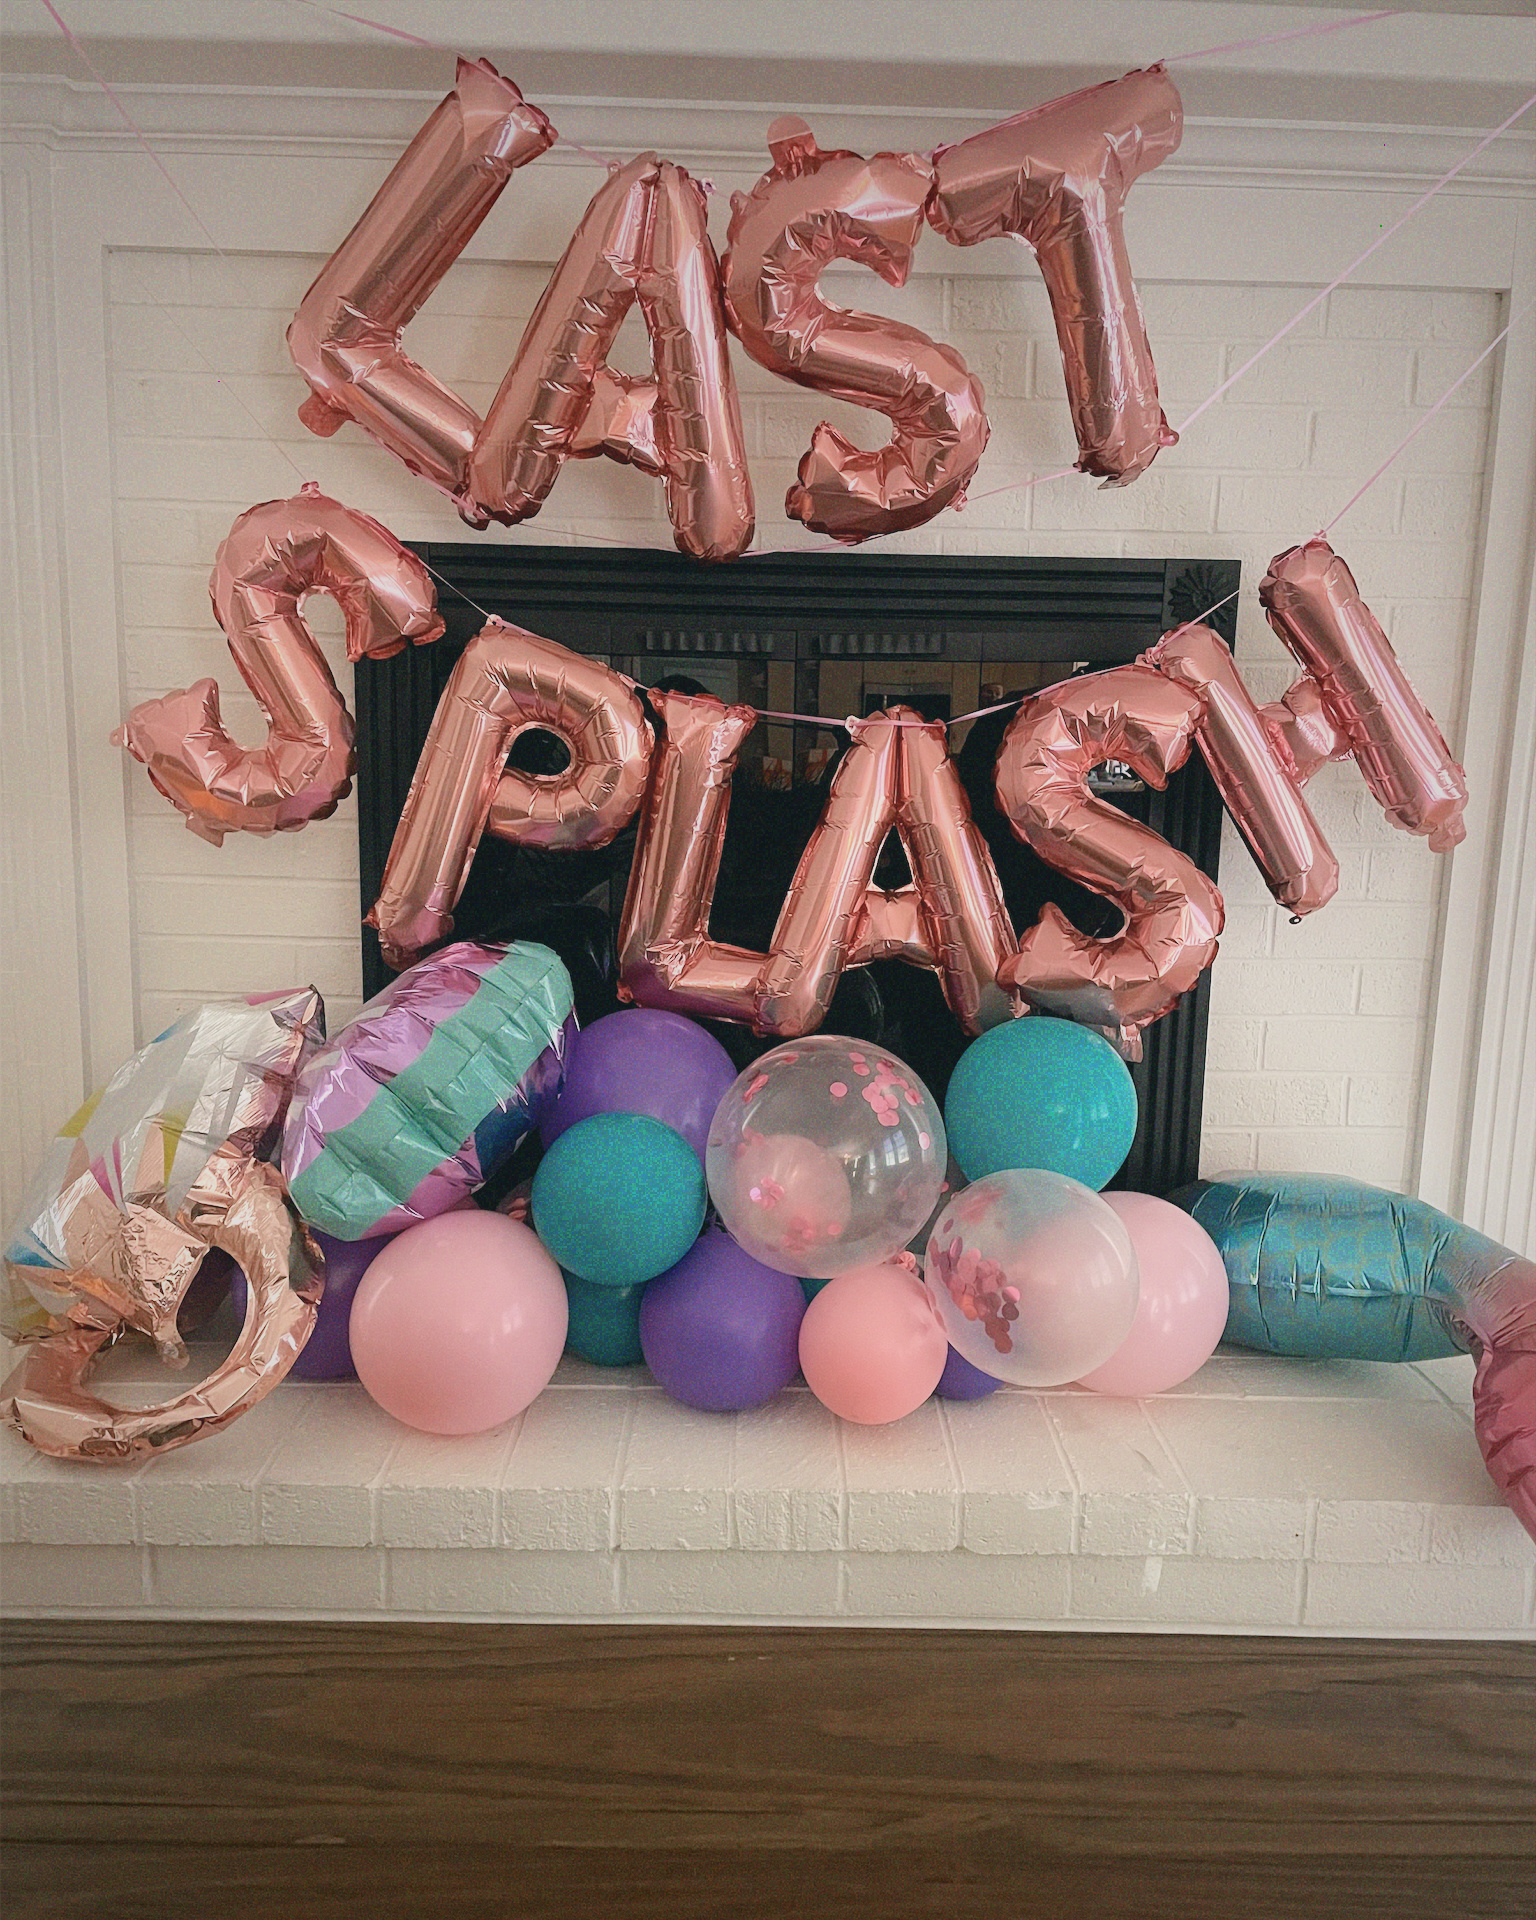 Everything You Need To Host a Coastal Bachelorette Weekend | Cape Cod Bachelorette | Wholesome Bachelorette Ideas | Cape Cad Massachusetts Bachelorette Itinerary | What To Do In Cape Cod for A Bachelorette Party | New England Bachelorette | Coastal Bachelorette Party Theme | Bachelorette Themes | How To Host A Coastal Bachelorette | Decorations Last Splash Balloons | Simply by Simone